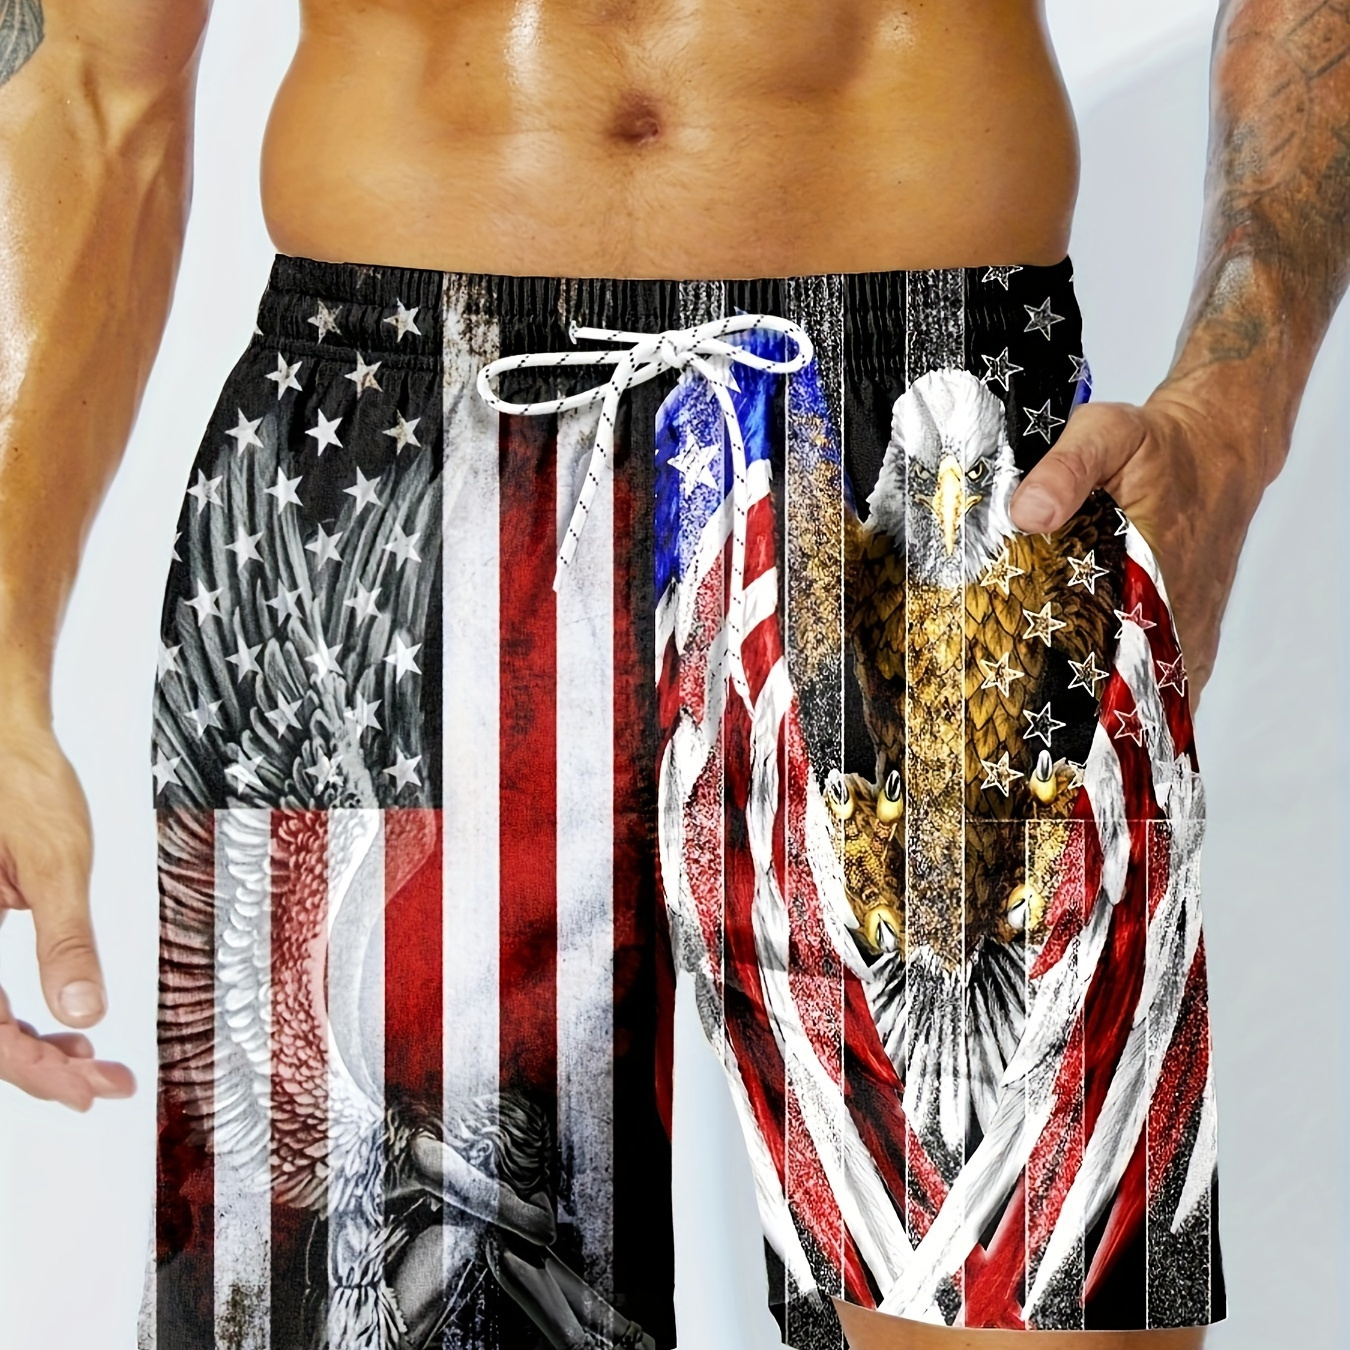 

1pc, Men's Eagle And American Flag Pattern Board Shorts With Drawstring And Pockets, Stylish And Cool Shorts For Summer Beach And Holiday Wear